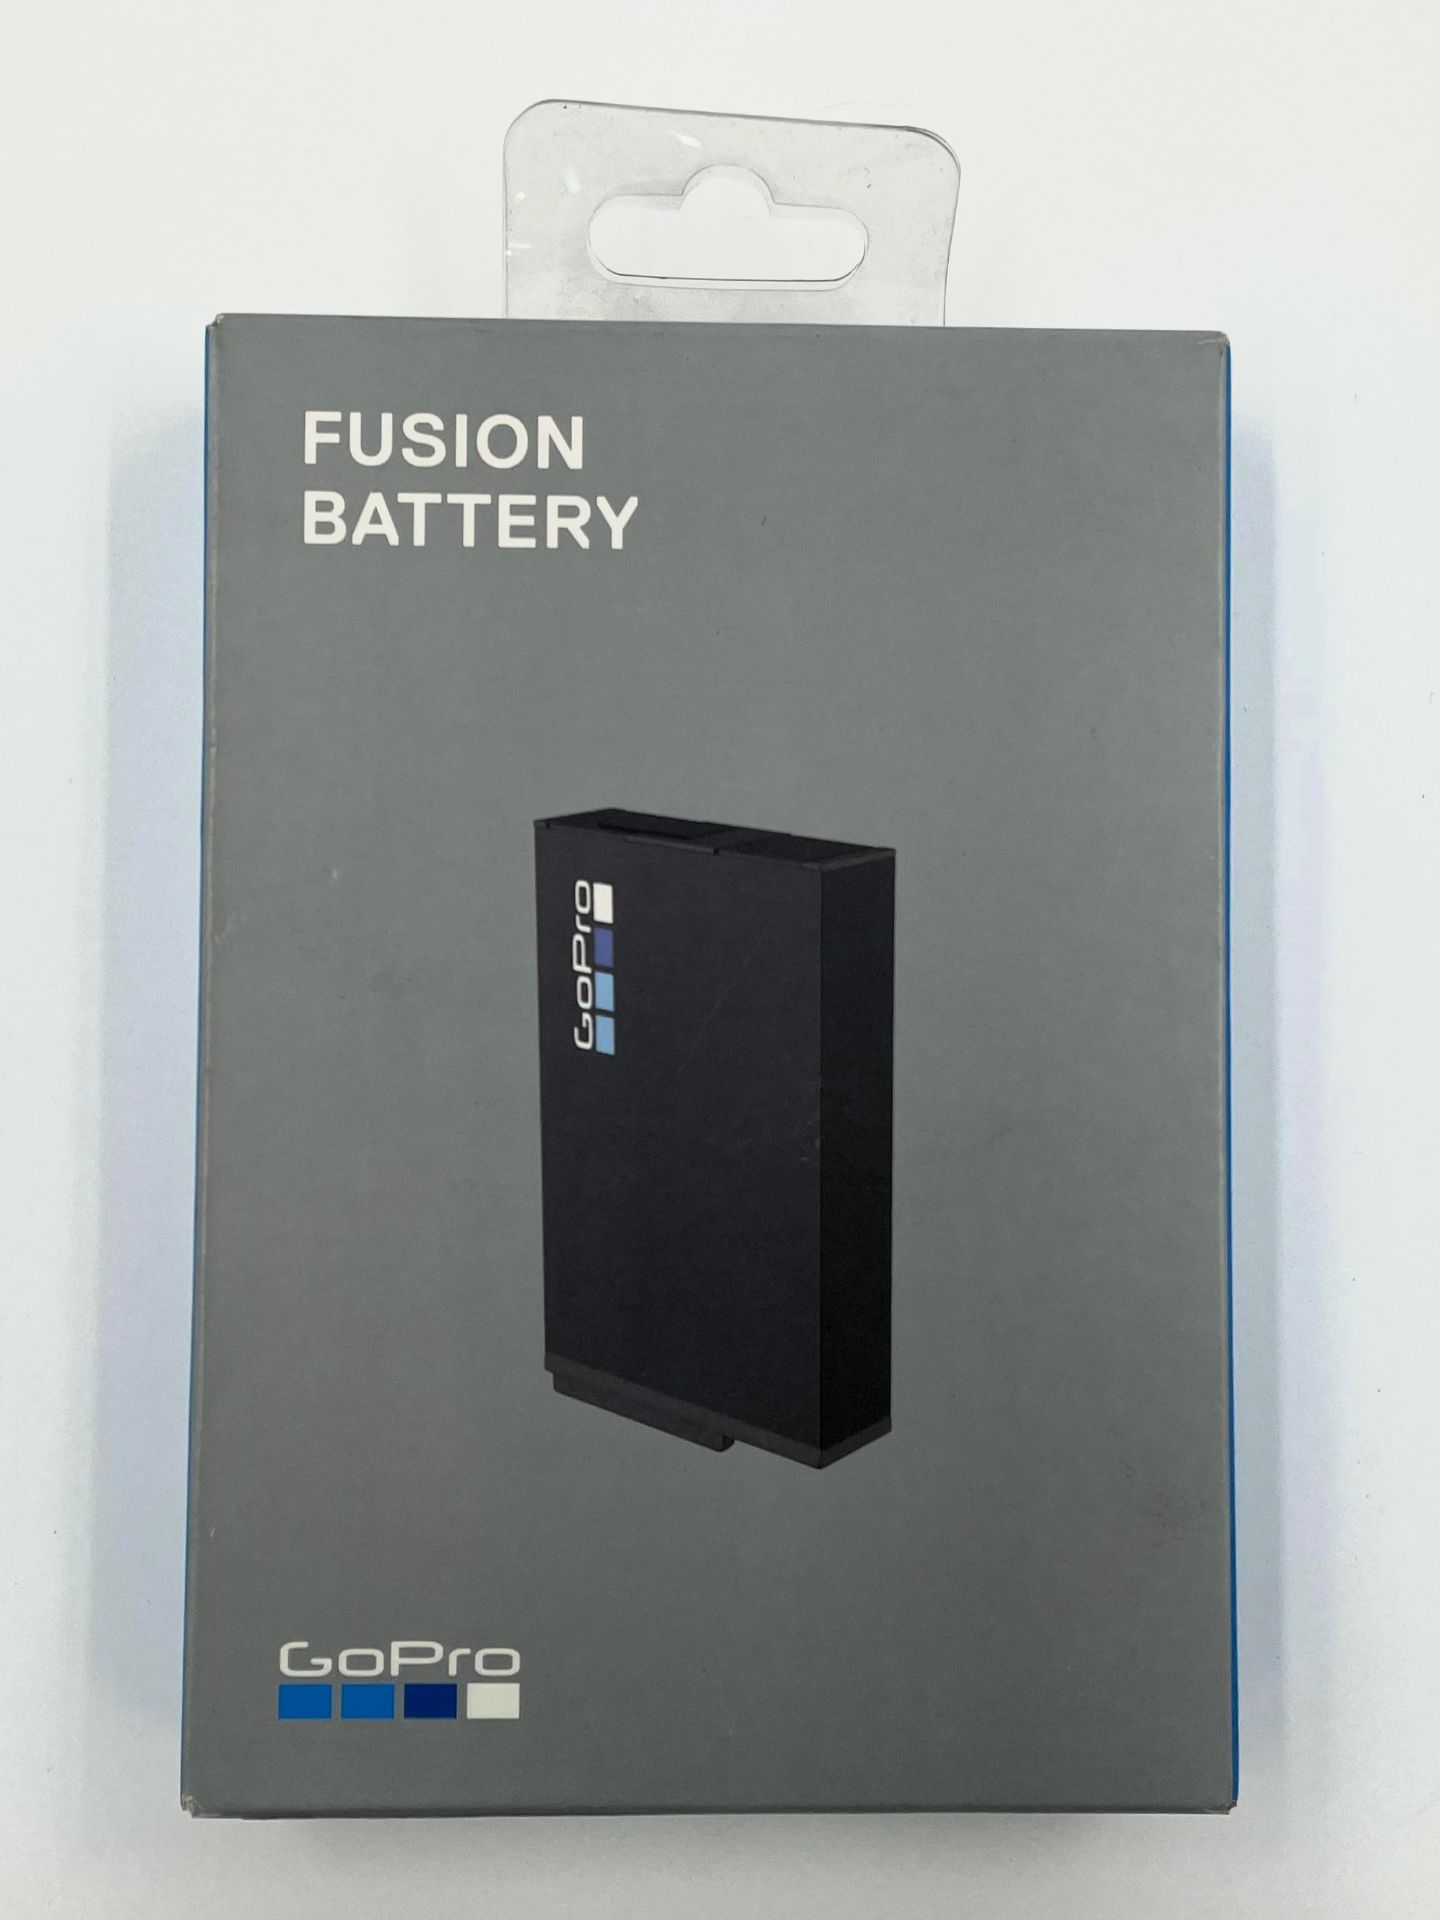 Five as new GoPro Fusion Battery Packs (P/N: ASBBA-001 EAN: 818279015324) (Boxes sealed).